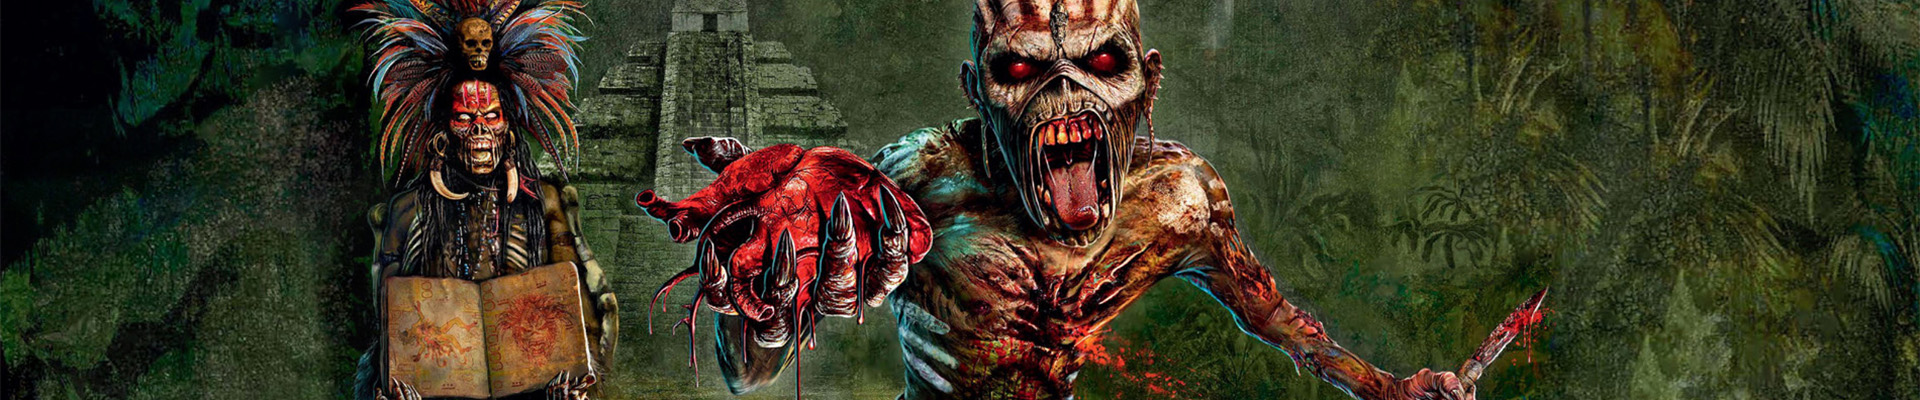 Maiden announce Luxembourg show